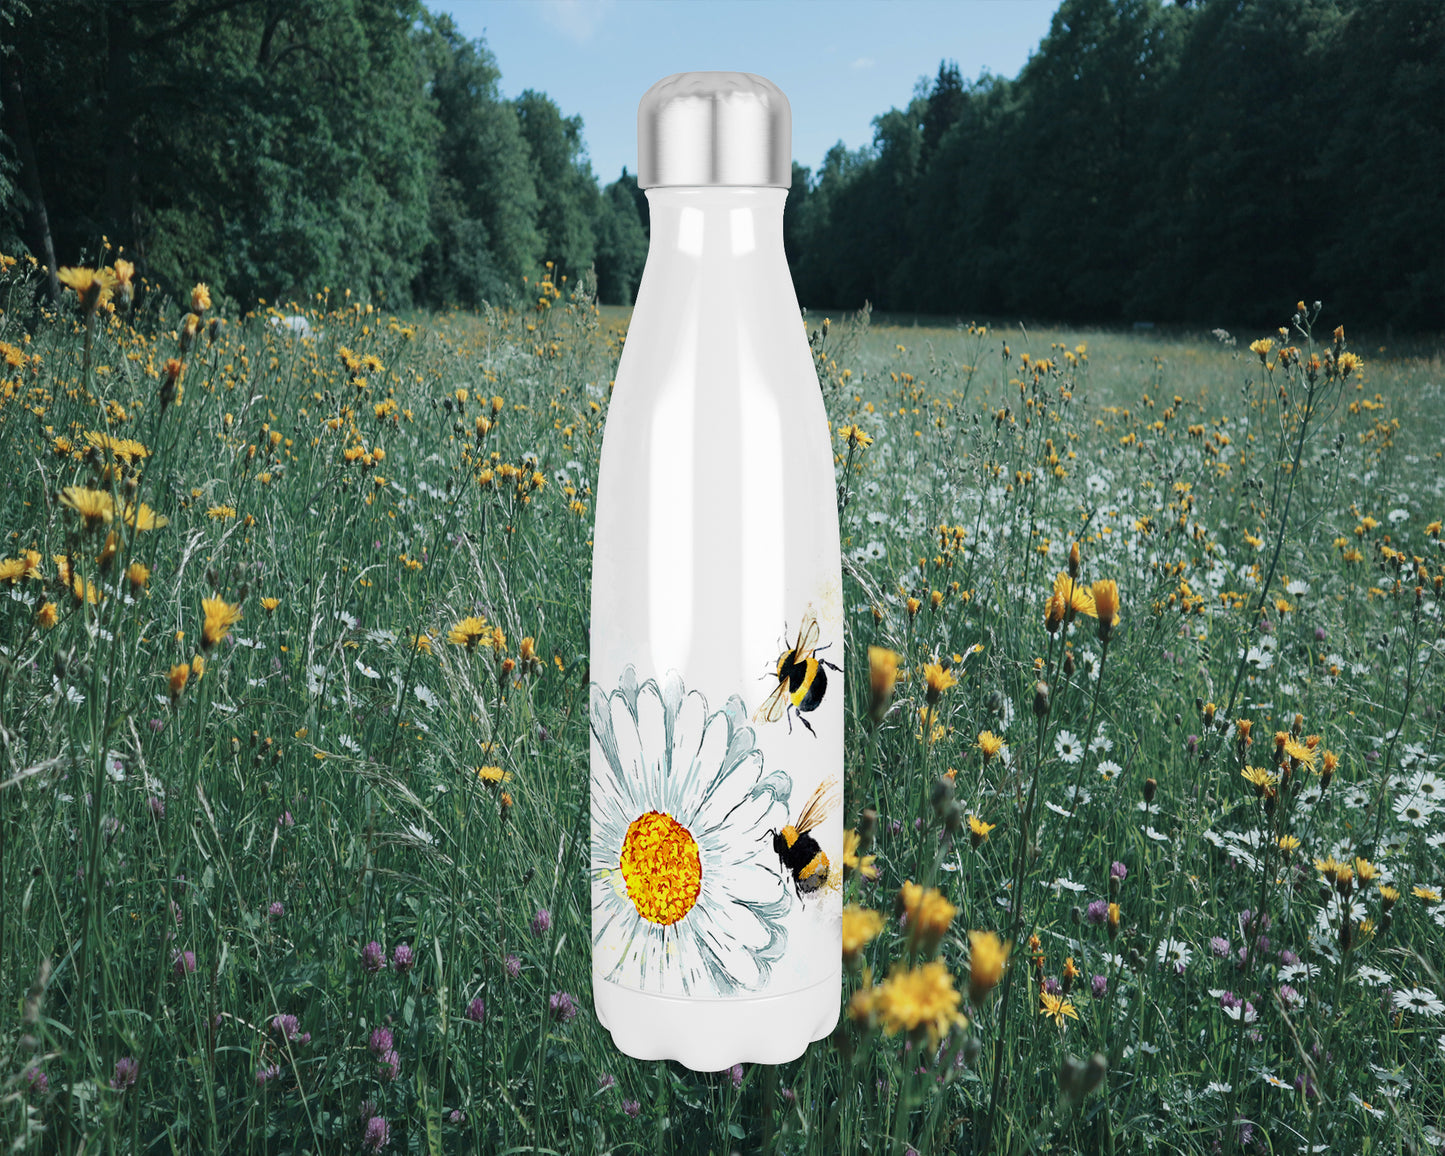 Daisies and Bees 500ml Bowling Pin Shape Thermal Insulated Drinks Bottle, Buzzy Bees, Made In Scotland, Buzzy Bees Gift, Buzzy Bee Lovers